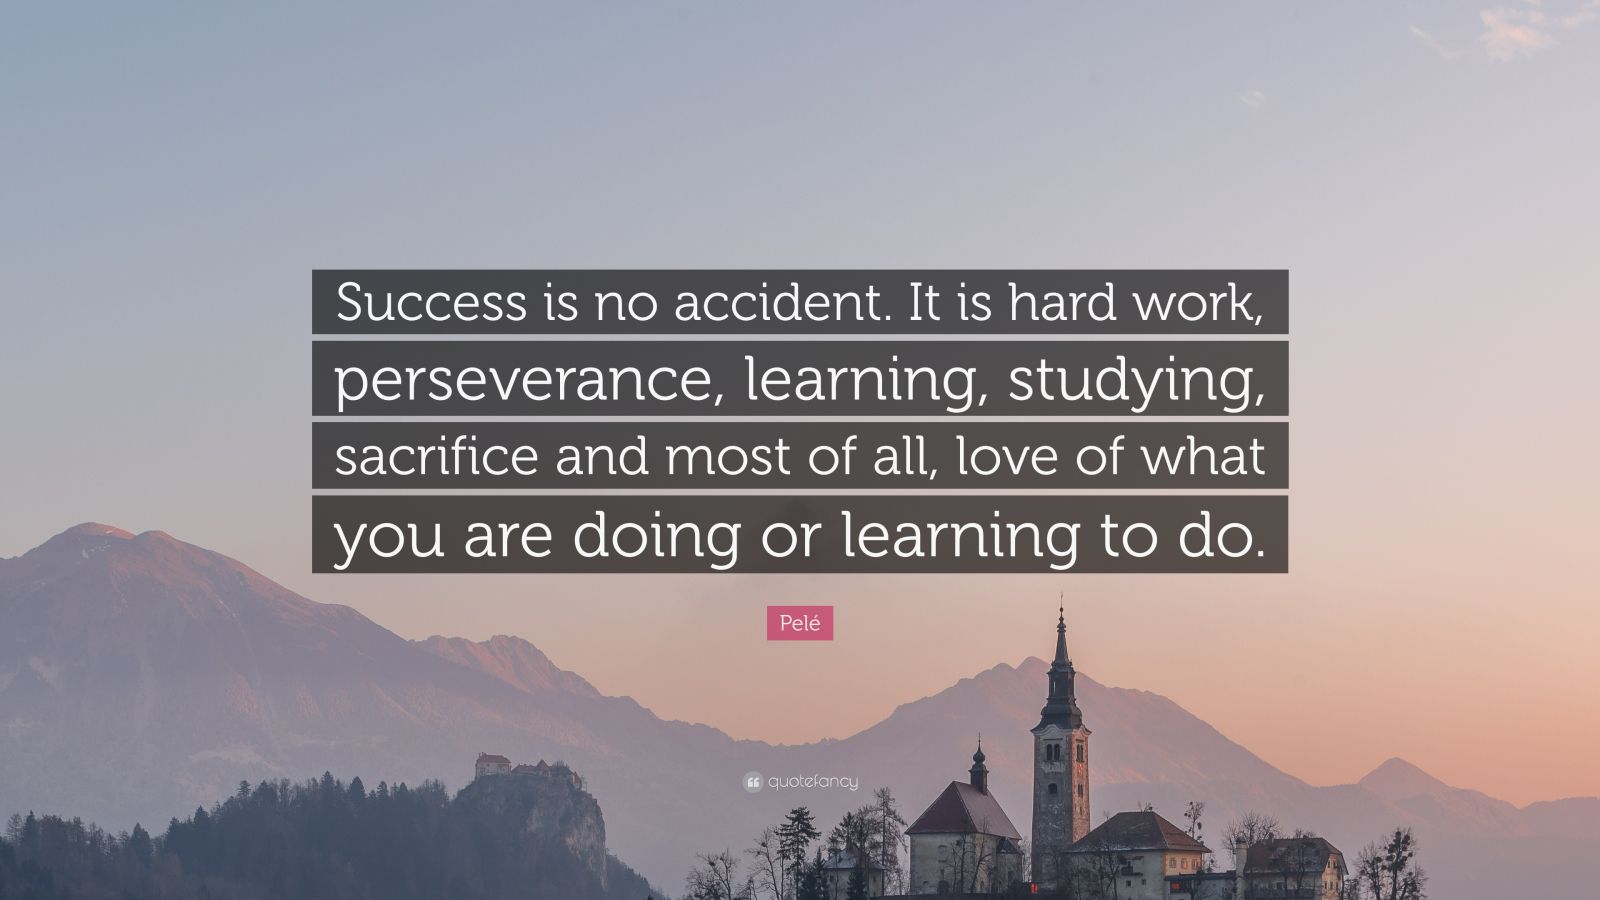 Pelé Quote: “Success is no accident. It is hard work, perseverance ...